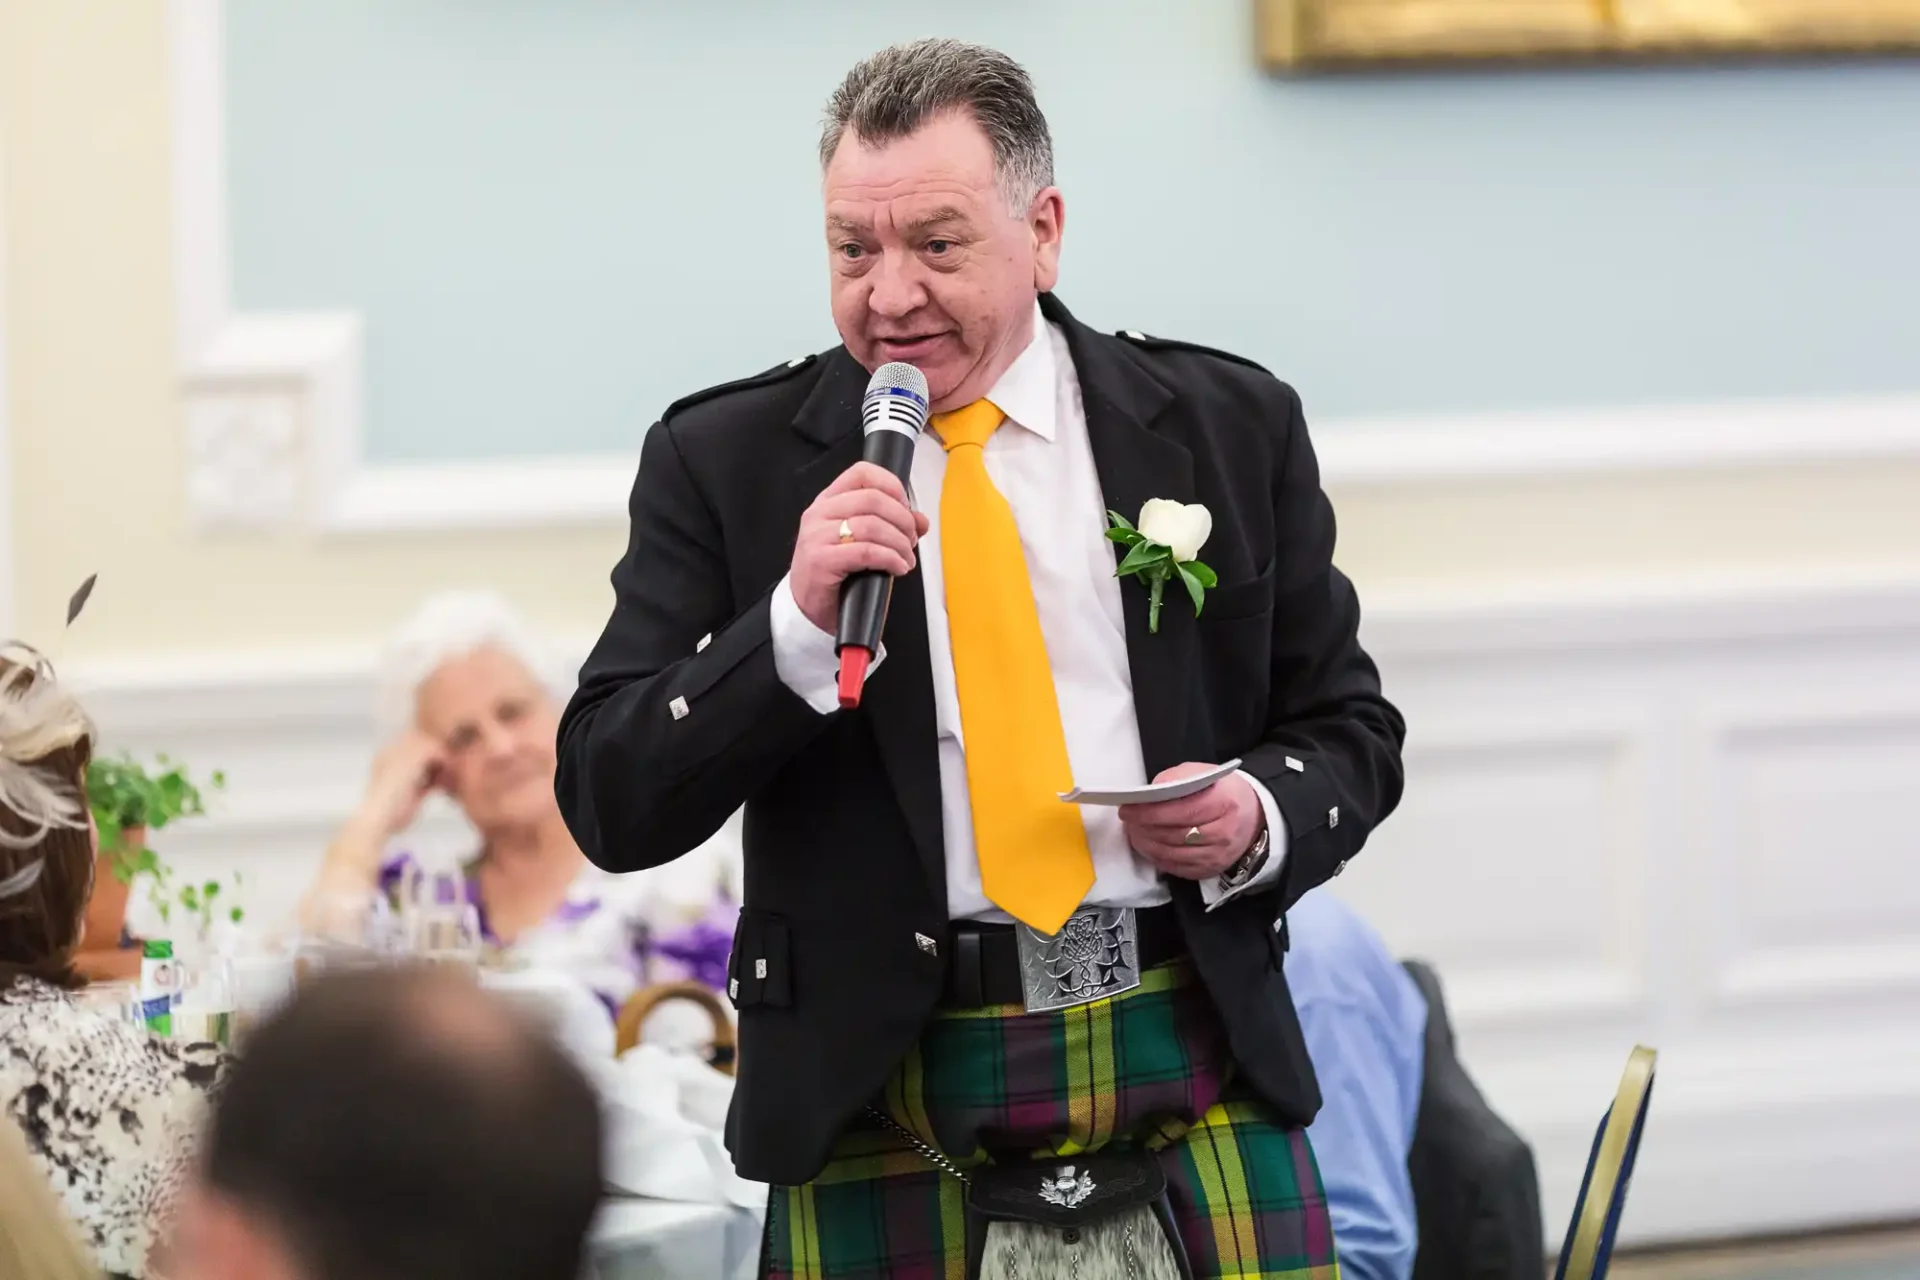 Man in kilt and tie speaking into a microphone at an event, holding a paper, with guests in the background.